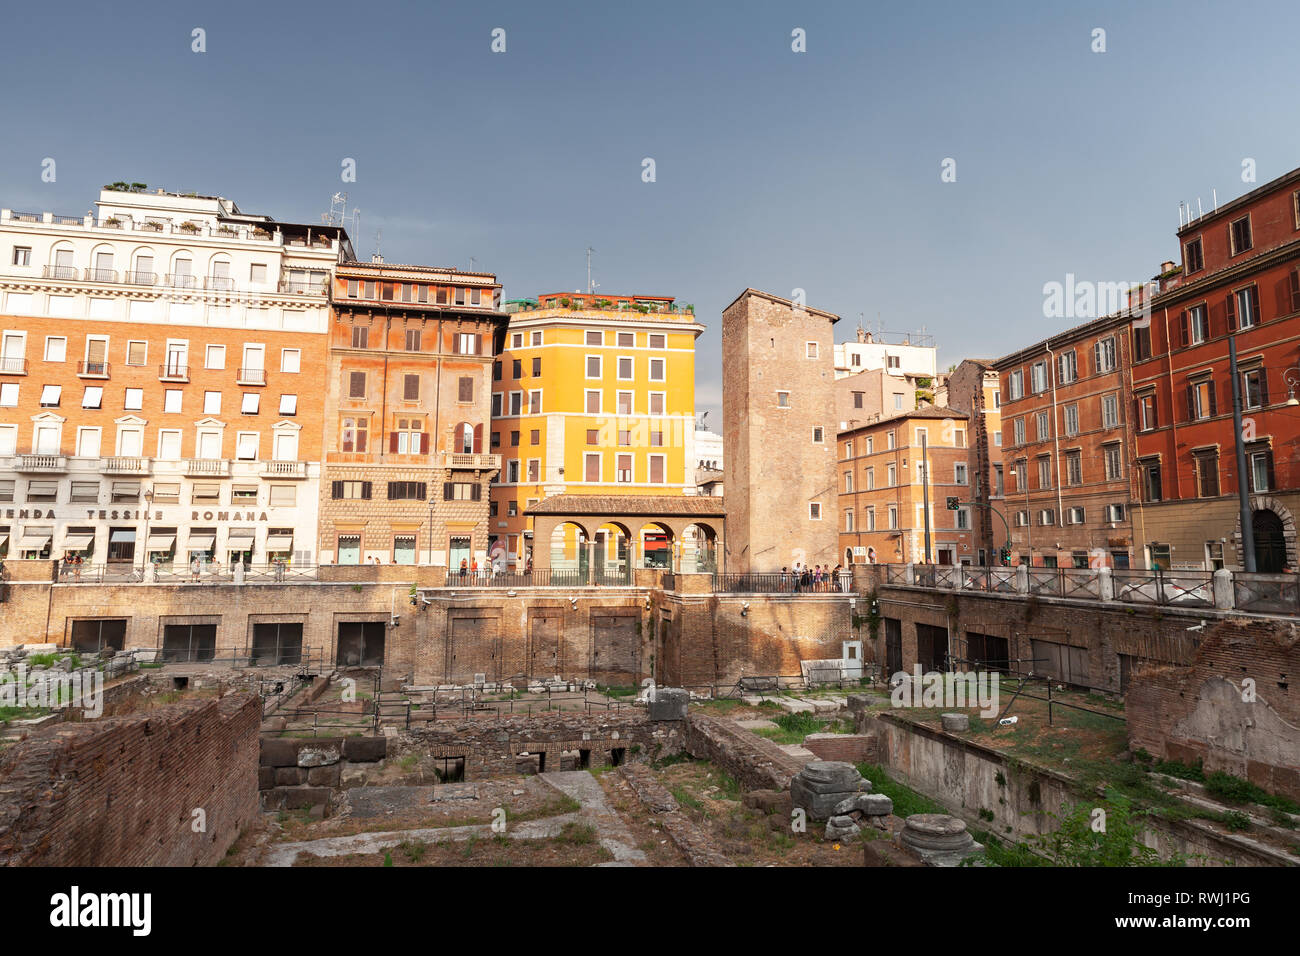 Rome, Italy - August 8, 2015: Tourists are on Largo di Torre Argentina square, Rome Stock Photo